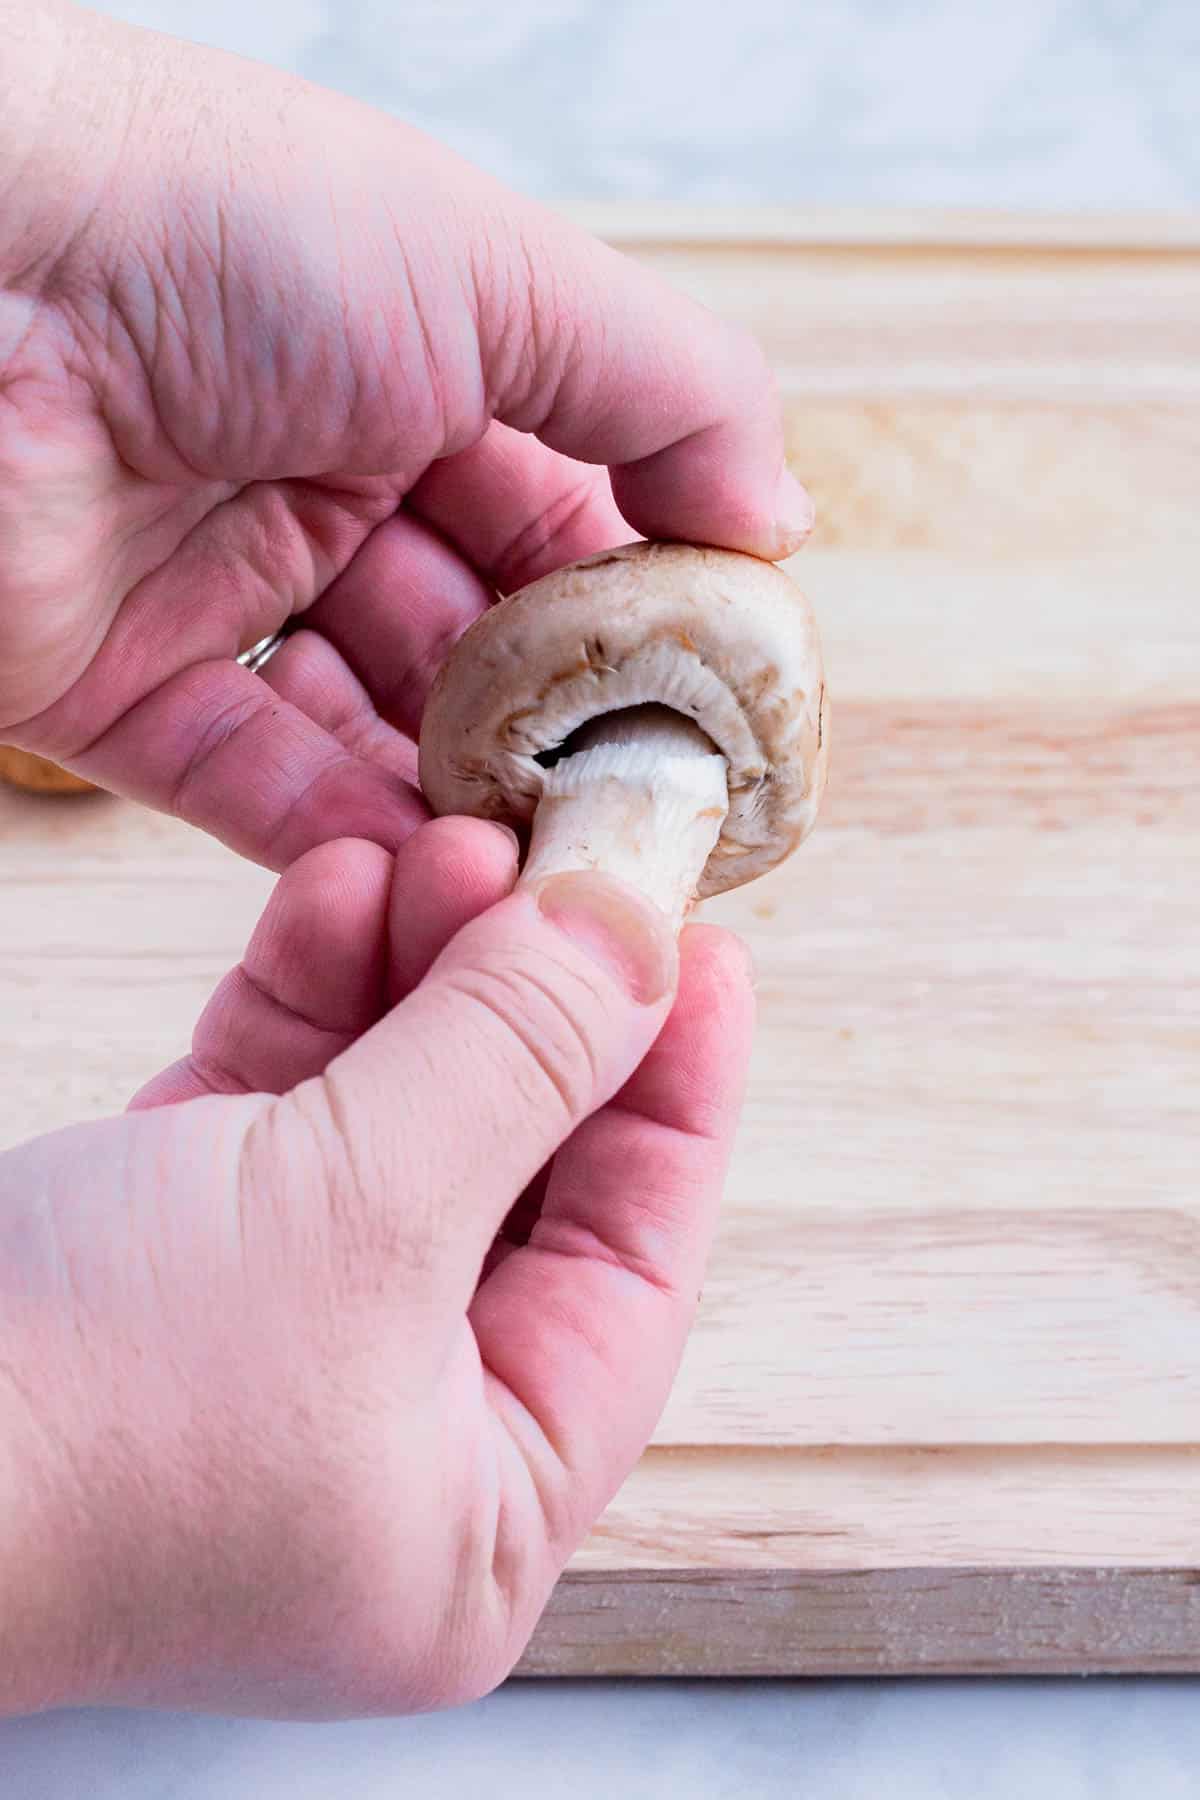 A hand removes the stem of a mushroom.